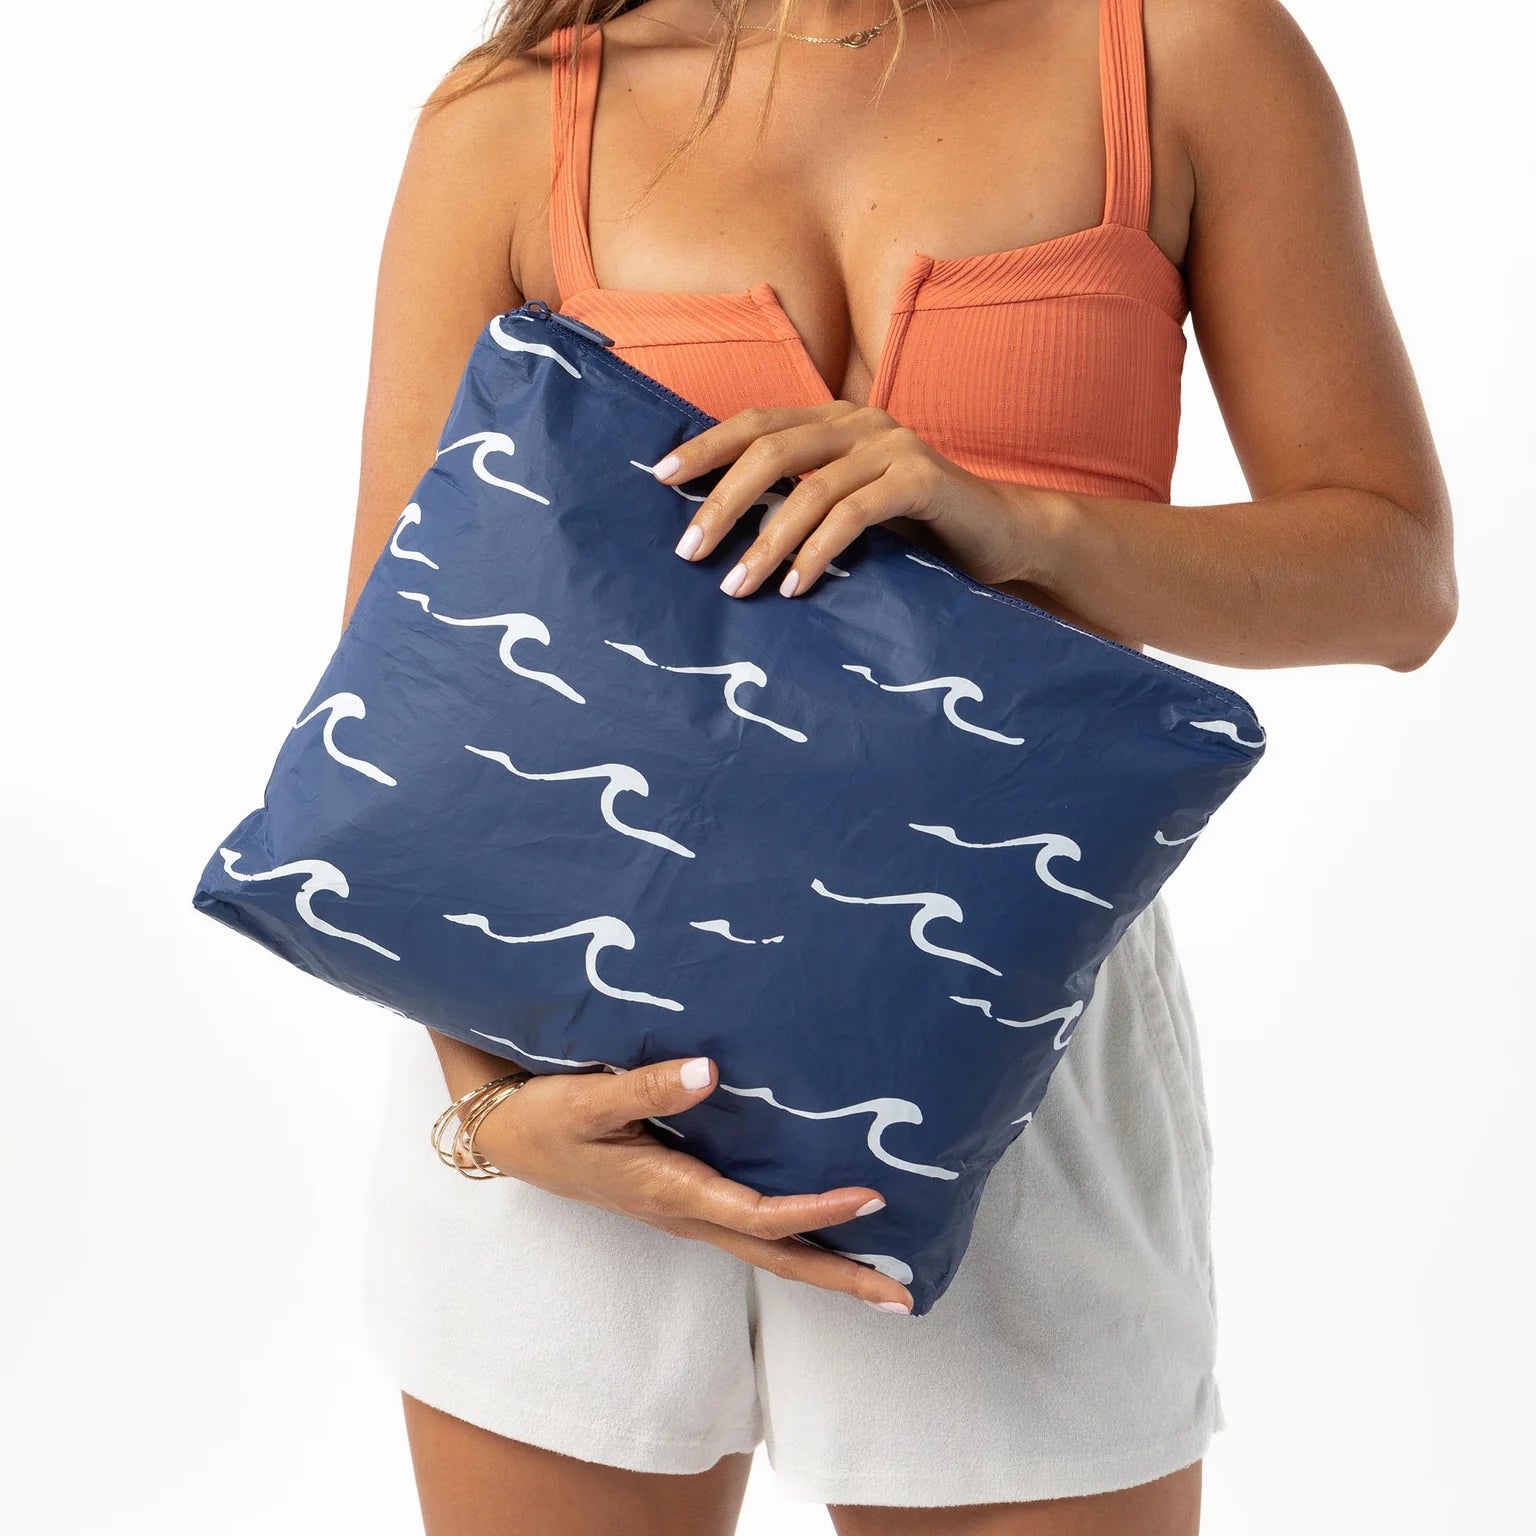 Seaside Max Pouch / White & Navy